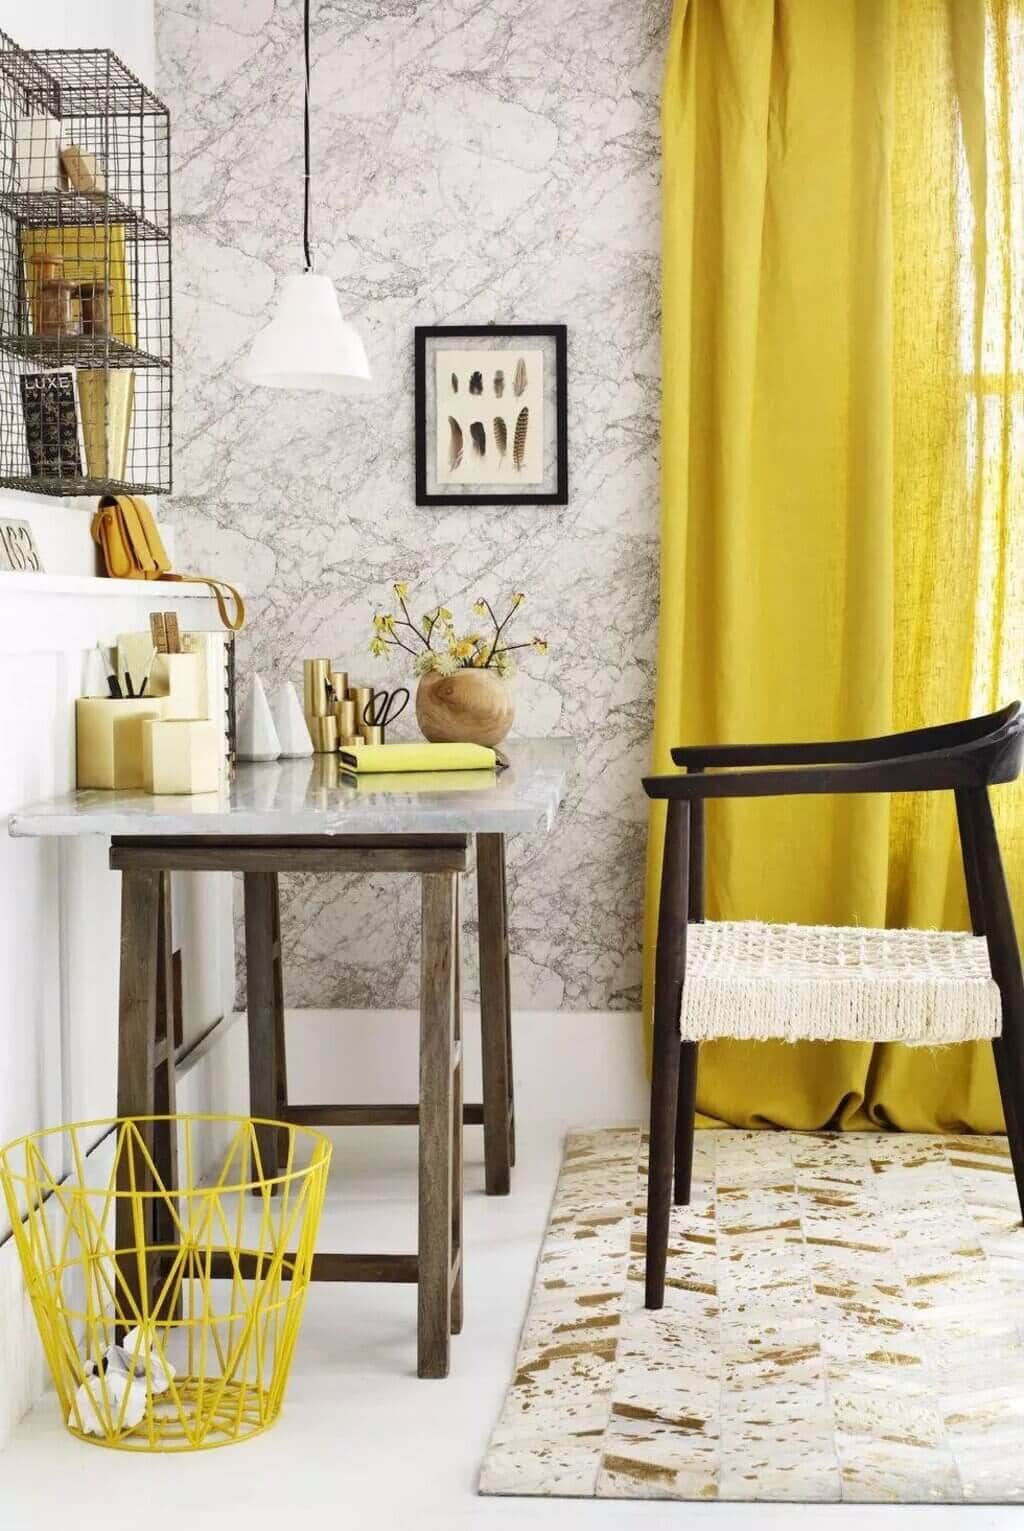 A room with a chair, table and yellow curtains
